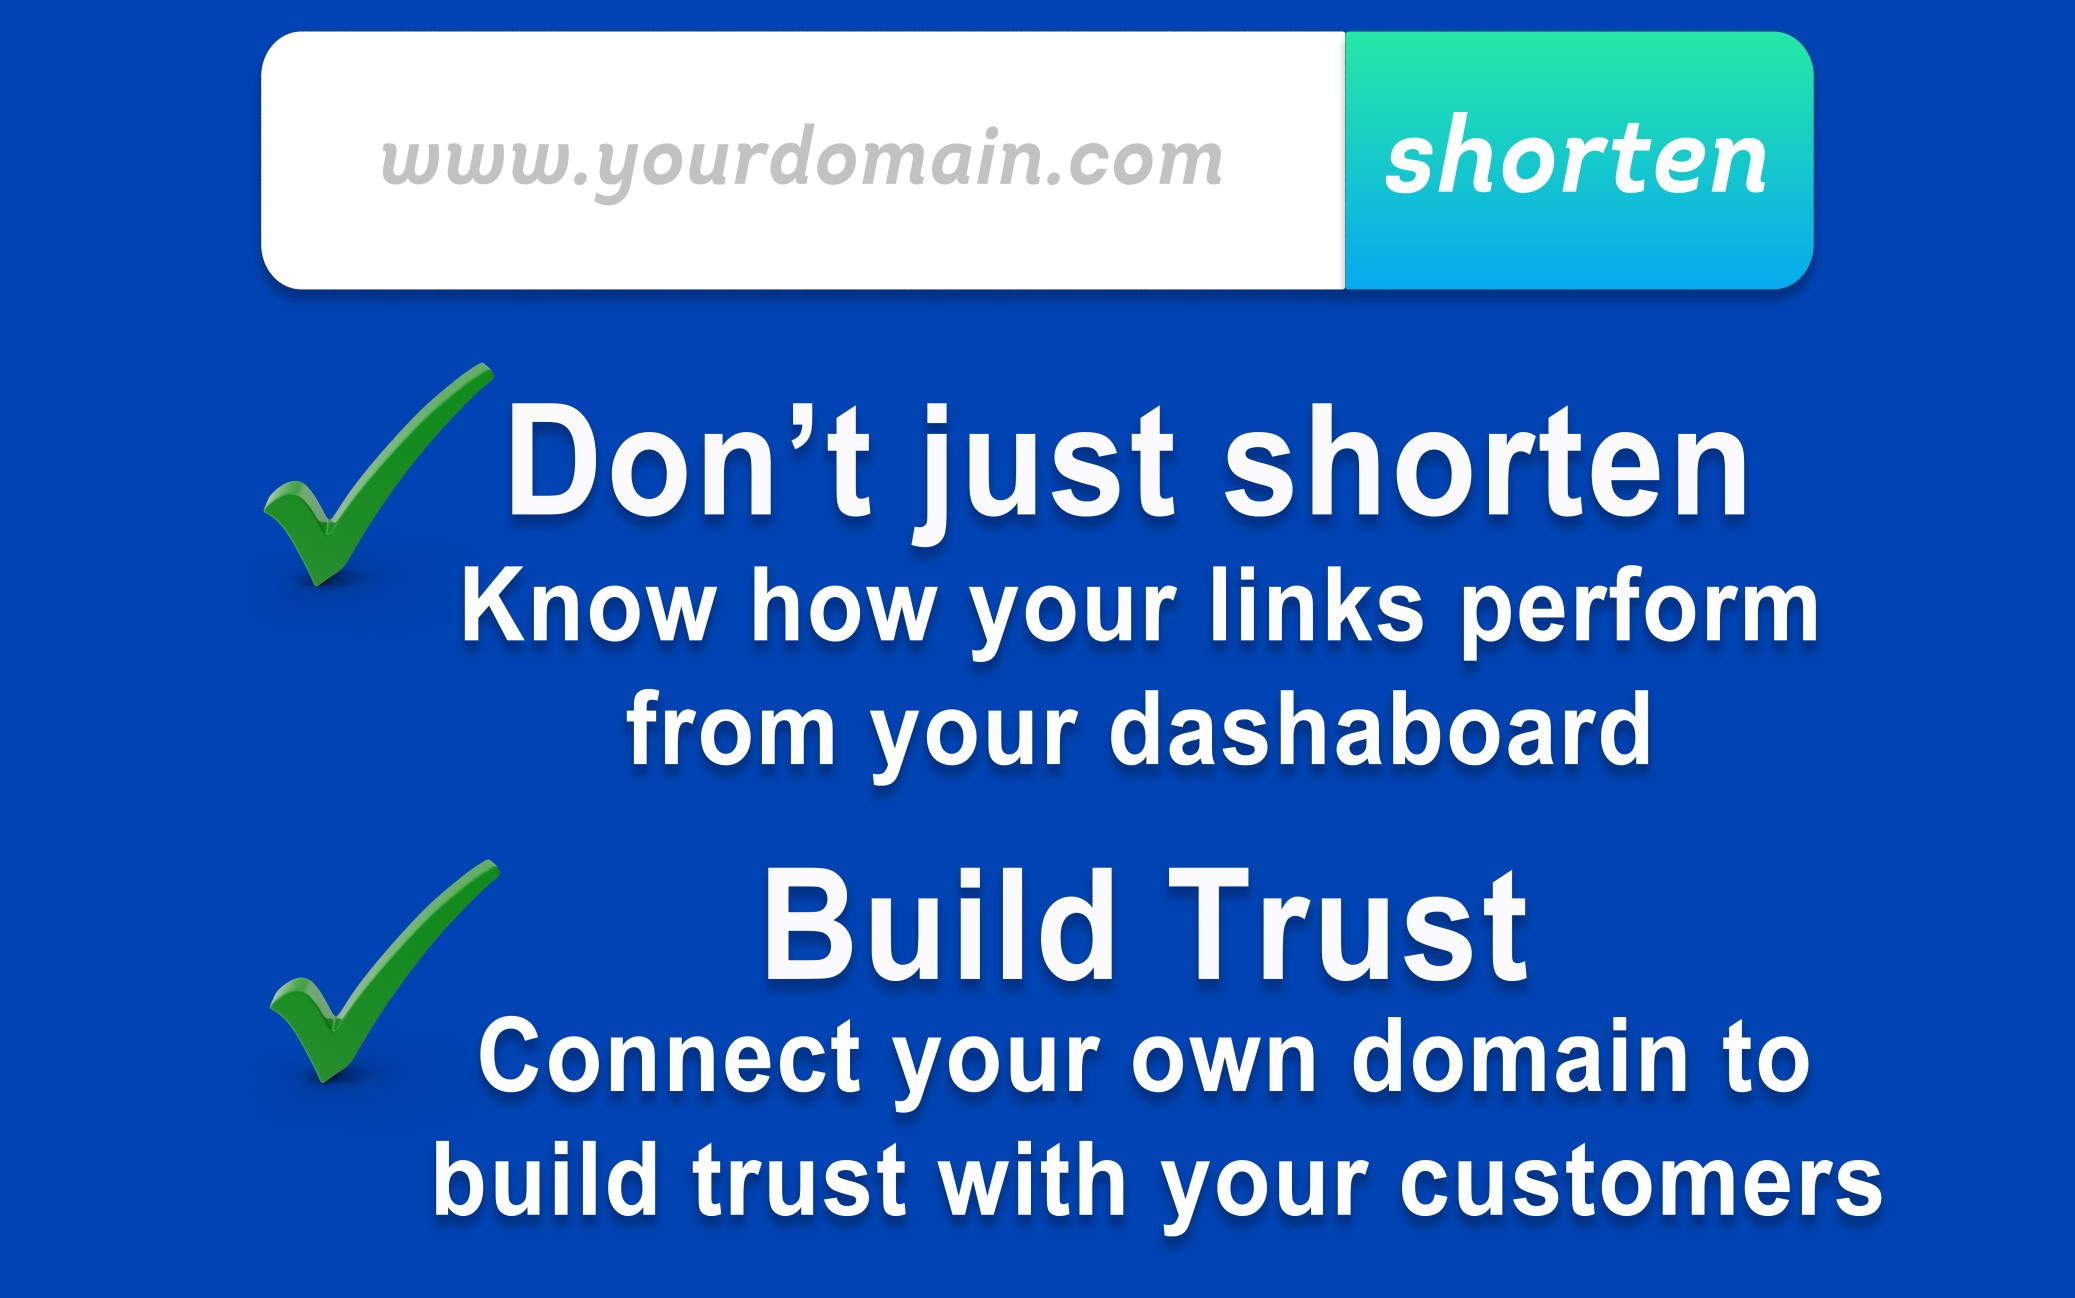 learn how to add your own domains to shorten links